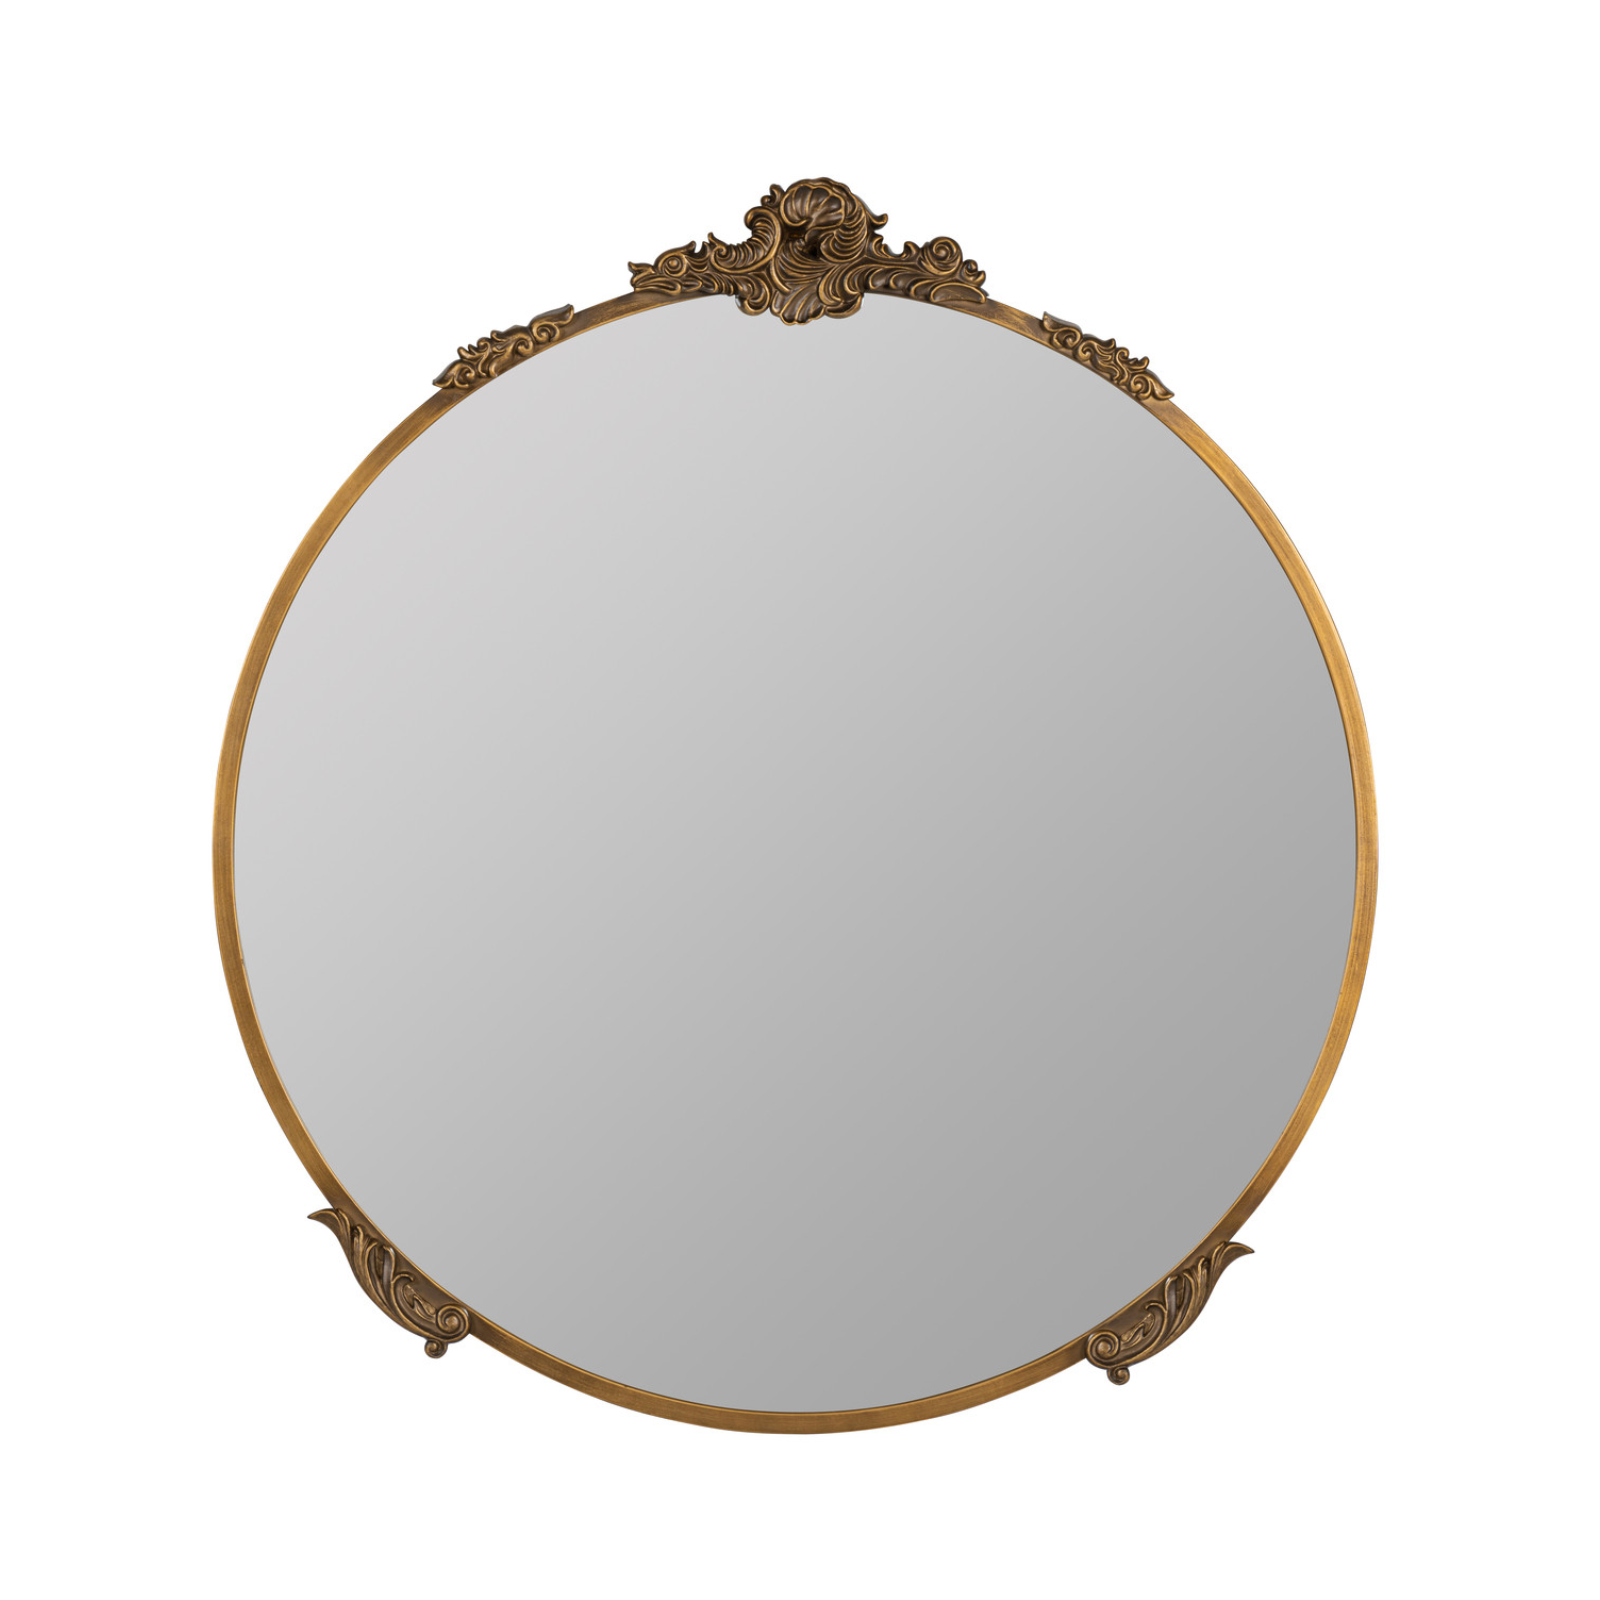 Adeline Round Wall Mirror - Rug & Weave